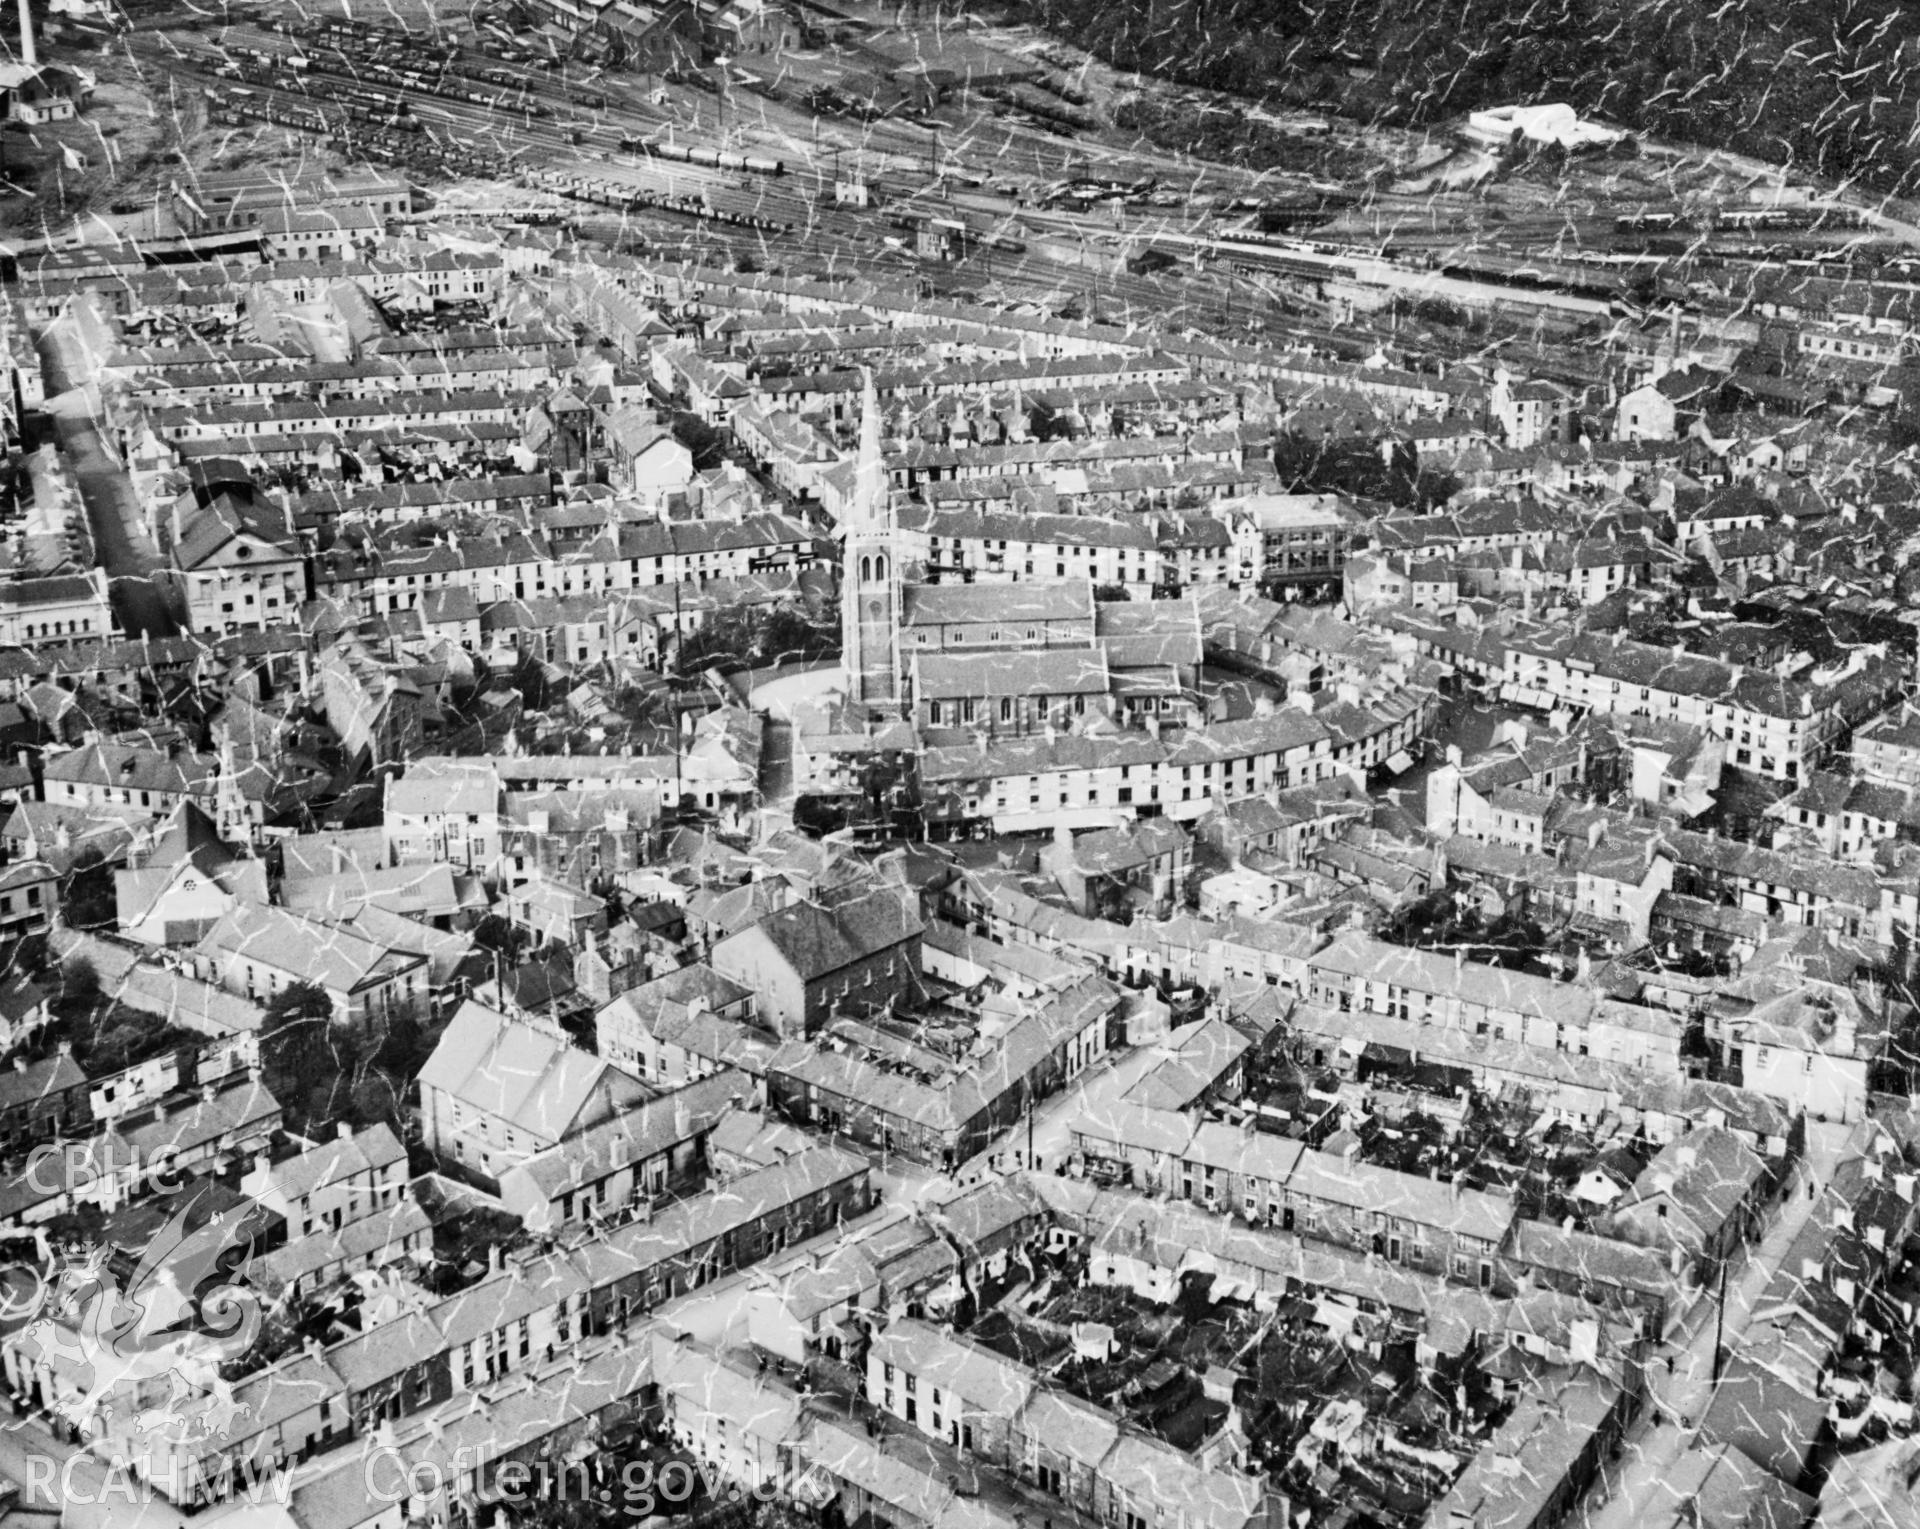 View of Aberdare showing St Elvan's church. Oblique aerial photograph, 5?x4? BW glass plate.